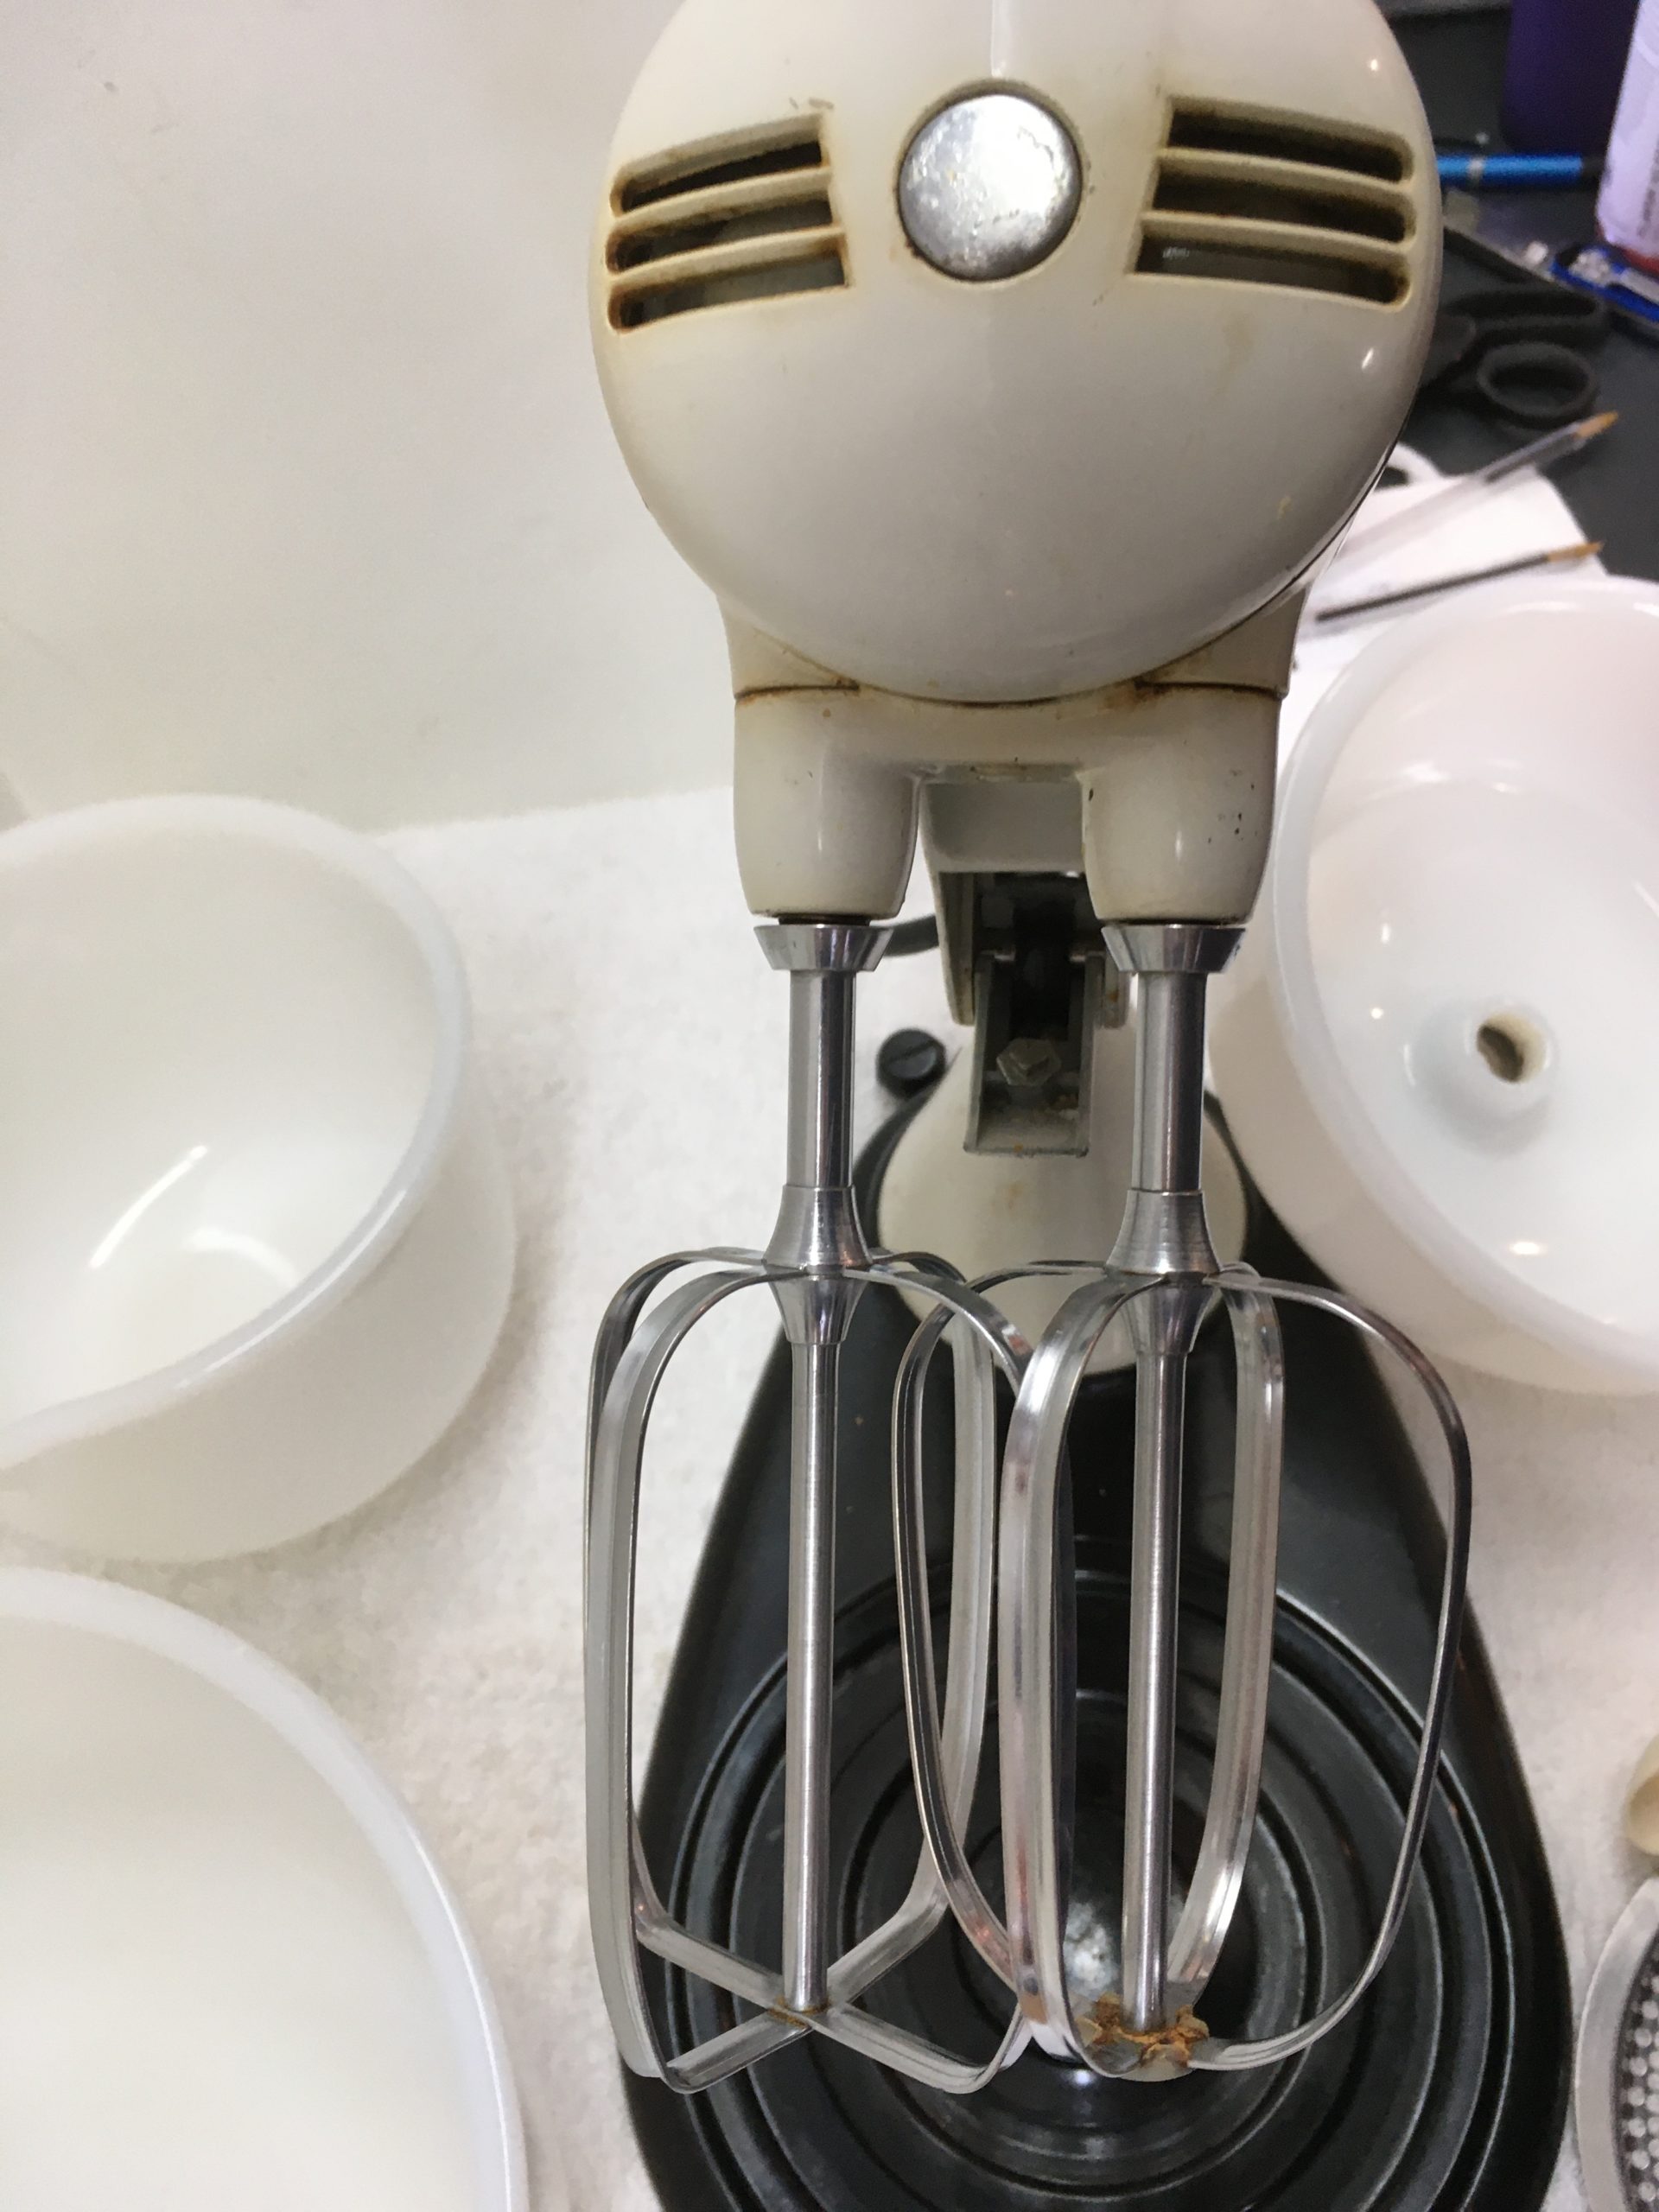 Vintage Sunbeam Mixmaster Mixer with all the Attachments Shown